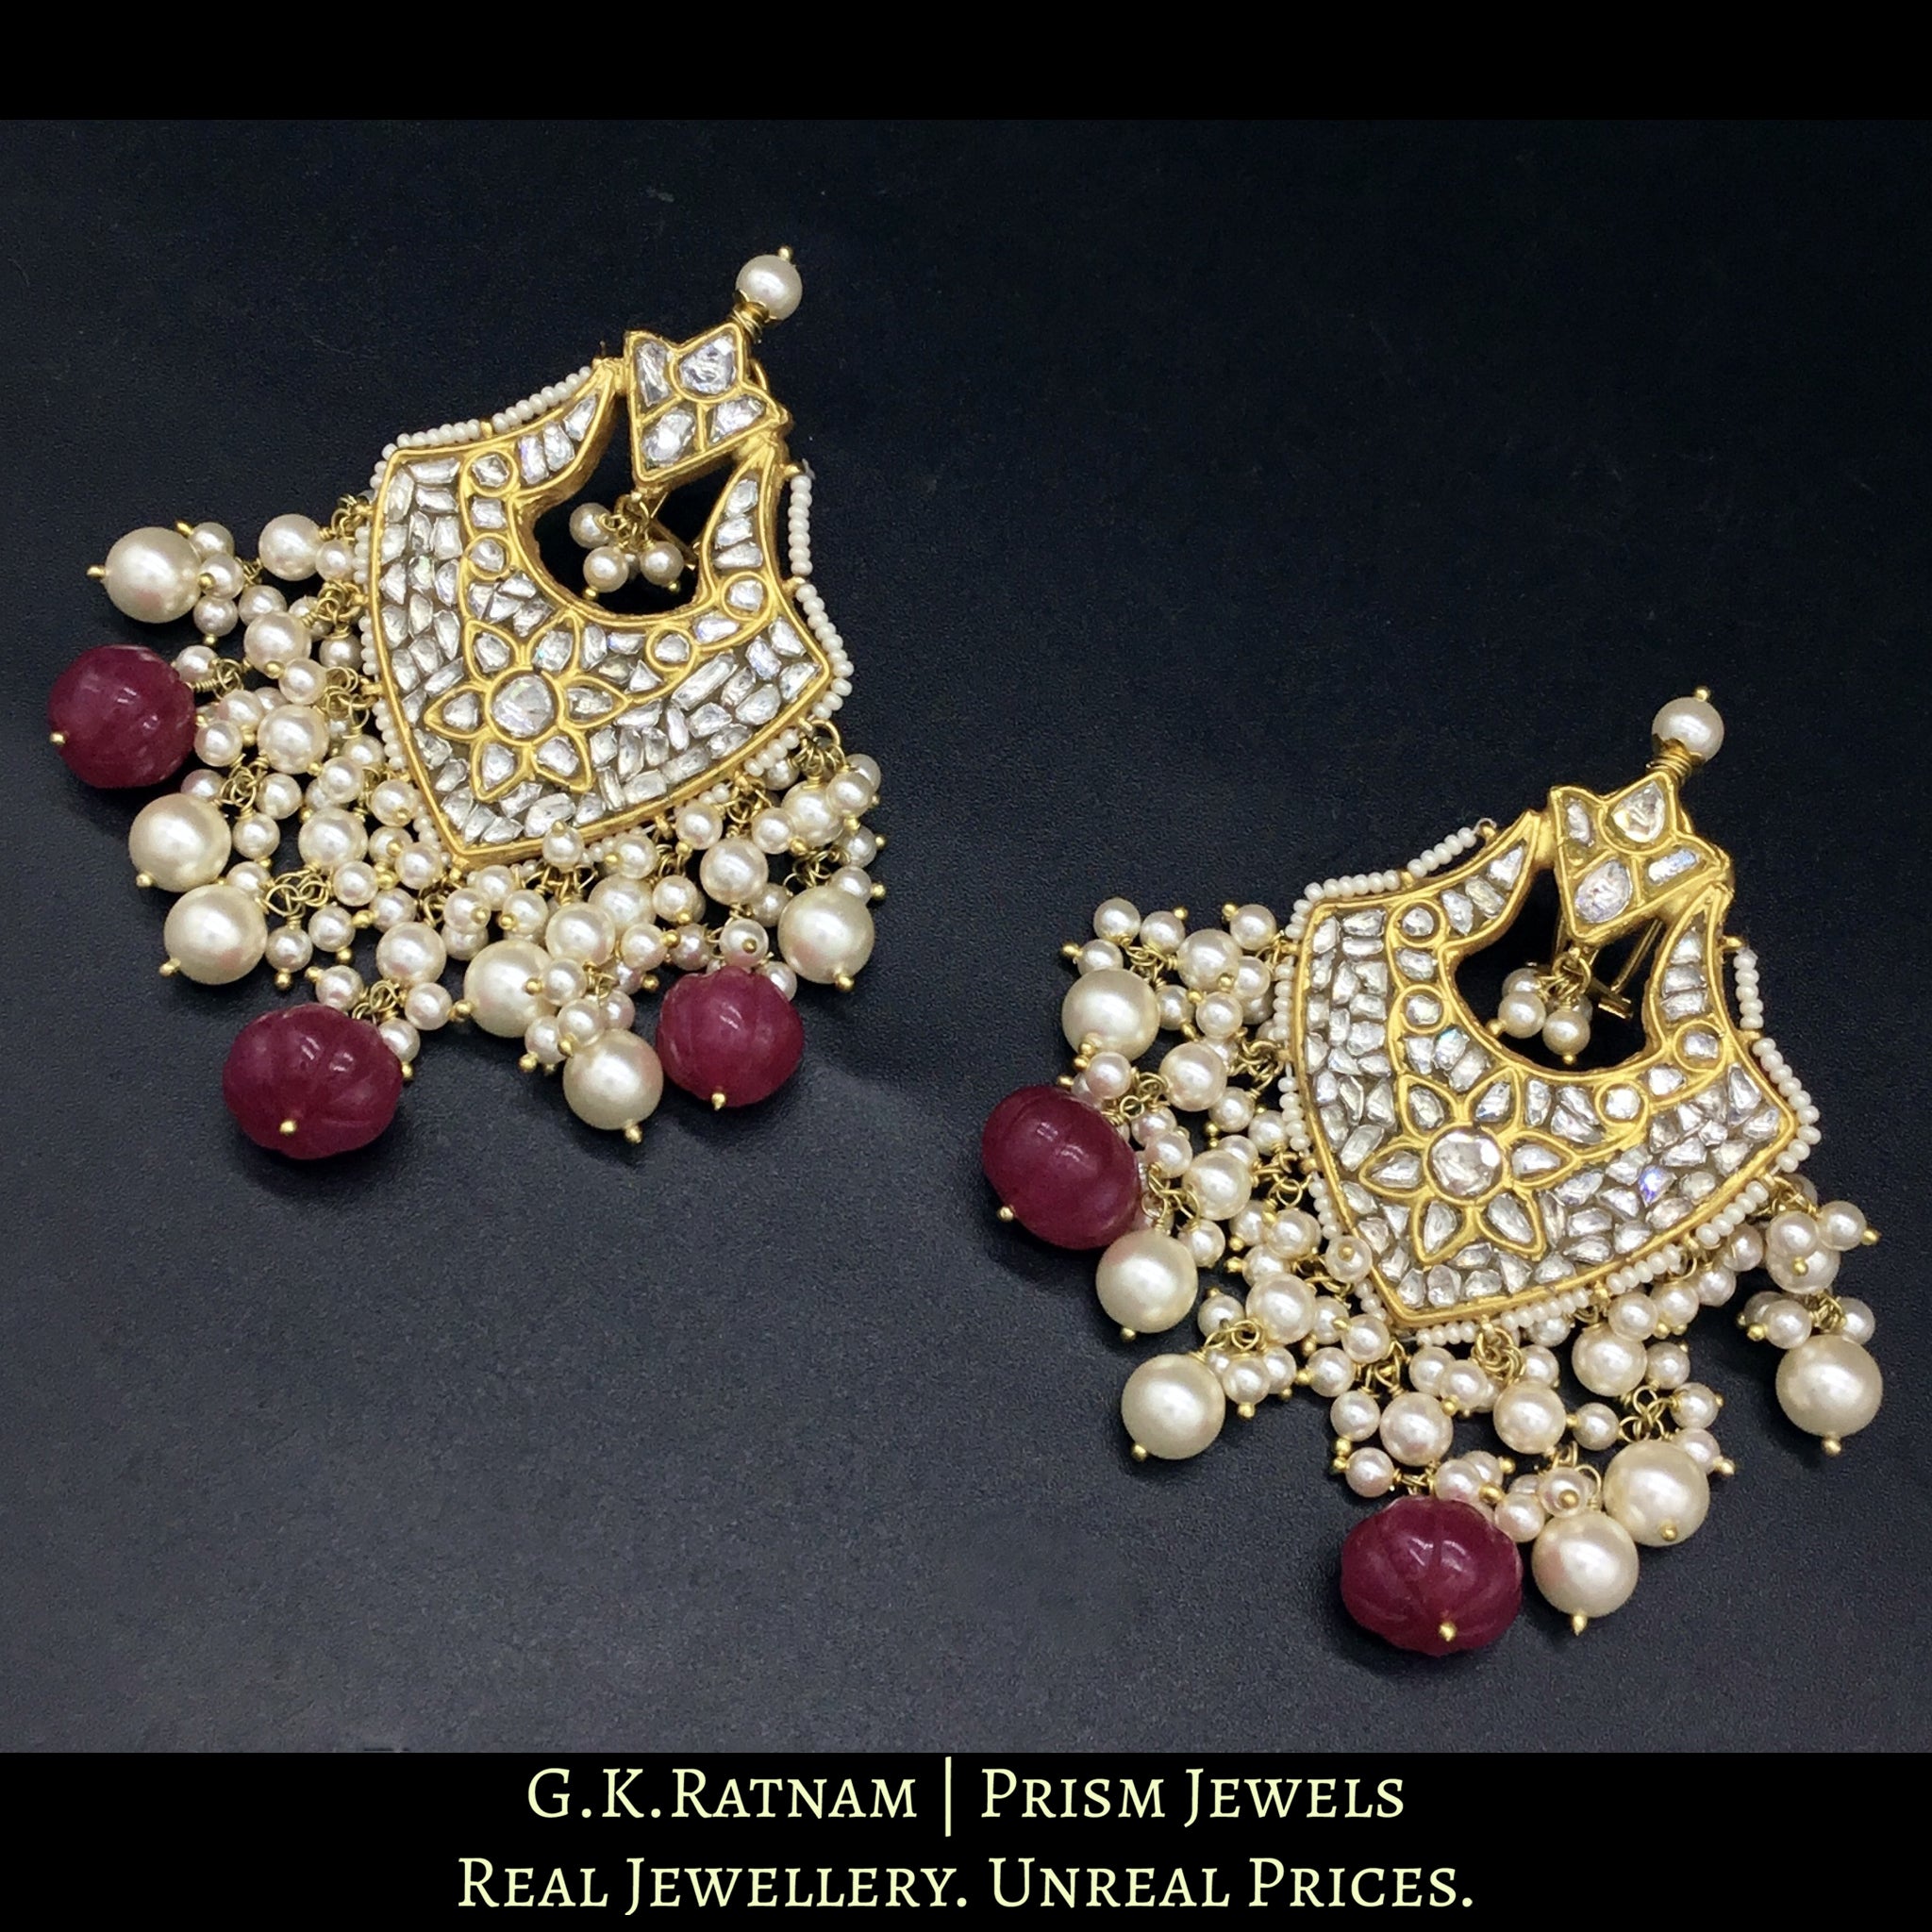 23k Gold and Diamond Polki Chand Bali Earring Pair with Ruby-red carved melons